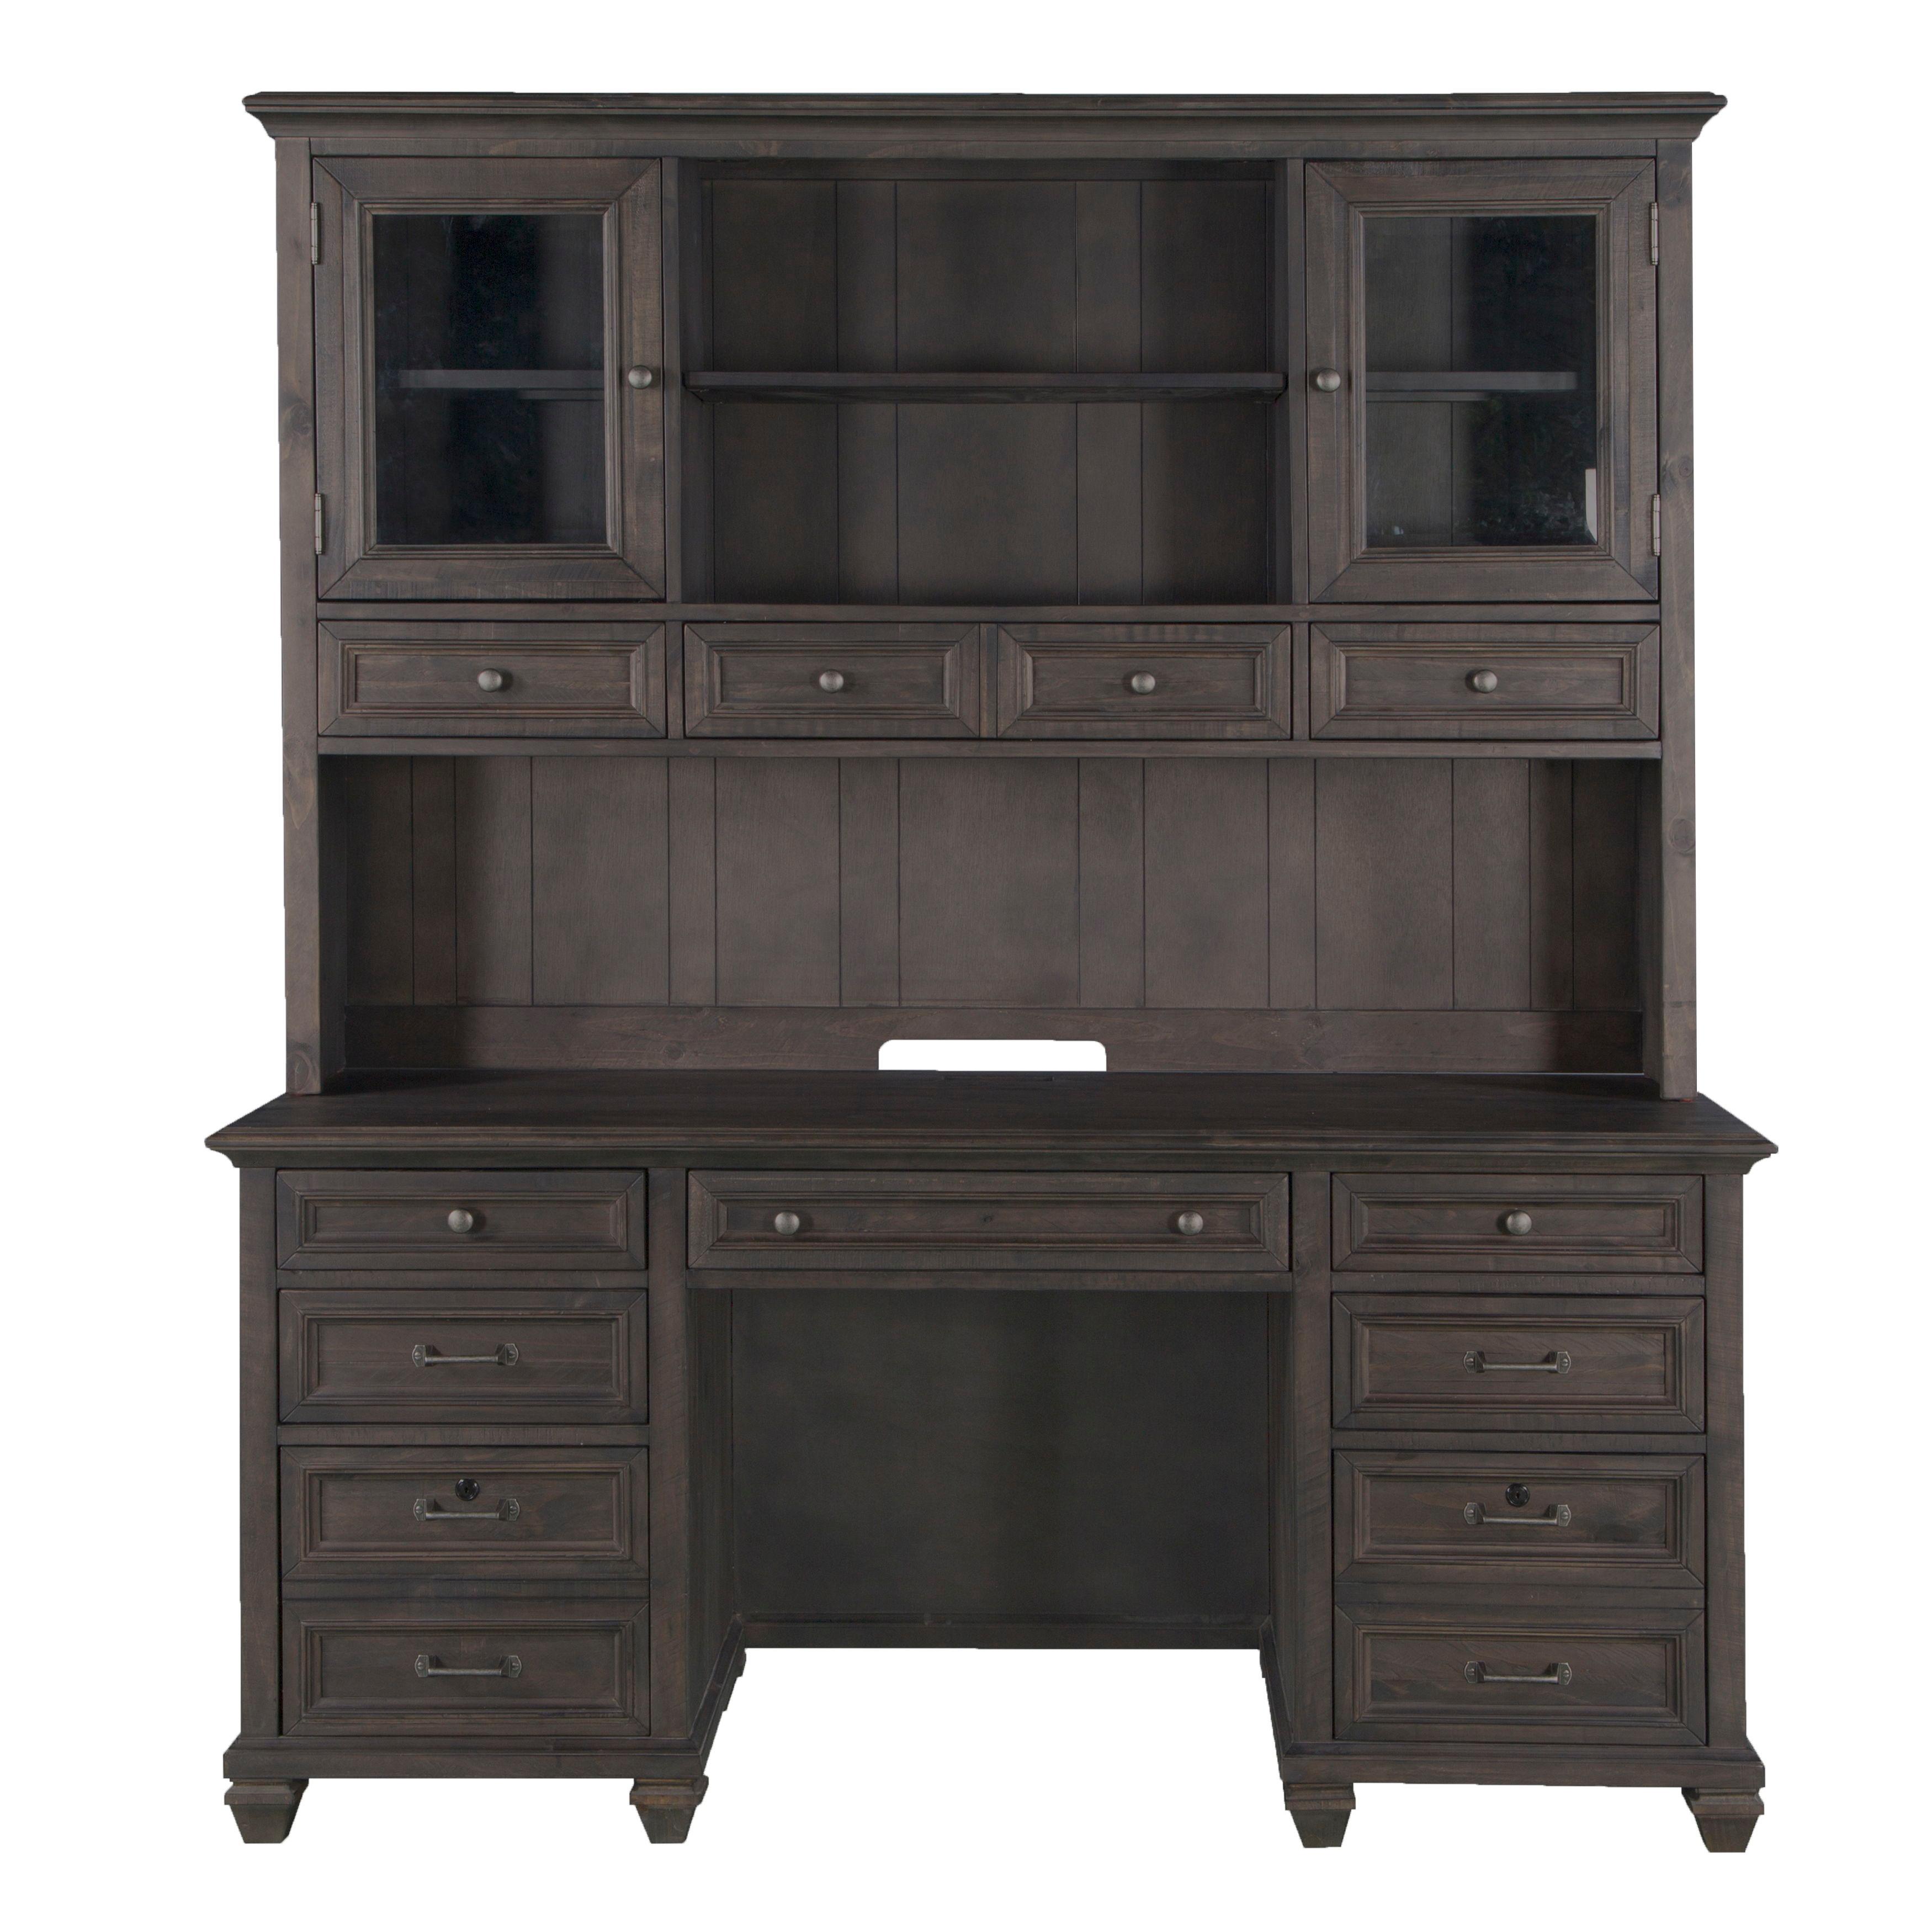 Magnussen Furniture - Sutton Place - Hutch - Weathered Charcoal - 5th Avenue Furniture